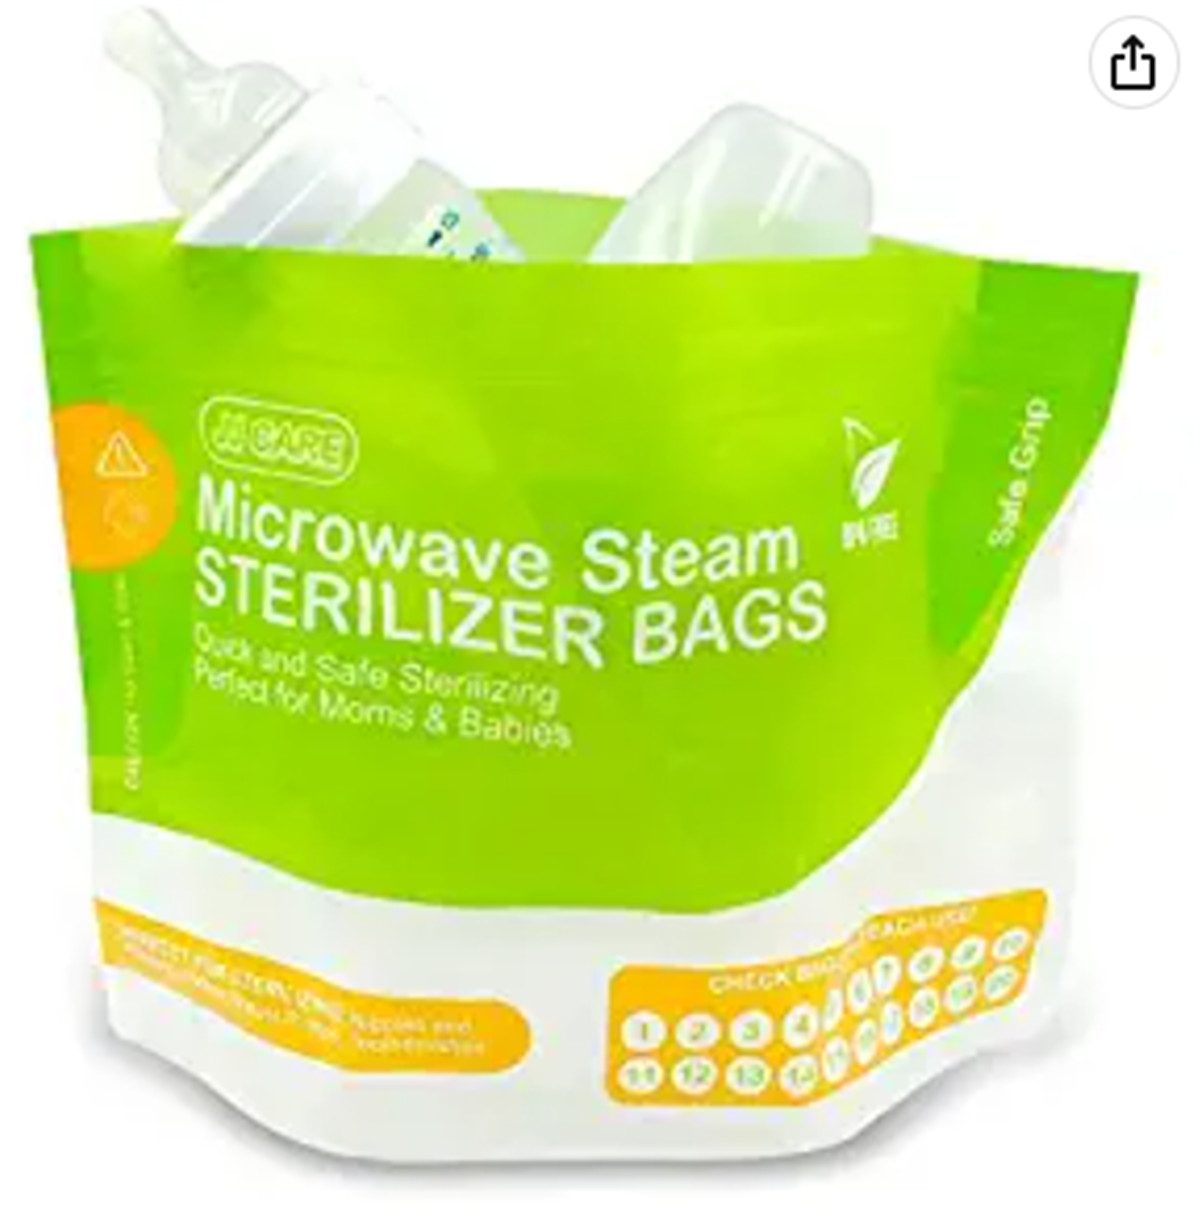 Premium Microwave Sterilizer Bags (20pcs) by Max Strength, Large & Durable Steam Bags for Baby Bottles, Soothers, Teethers & Training Cups, 20 Uses